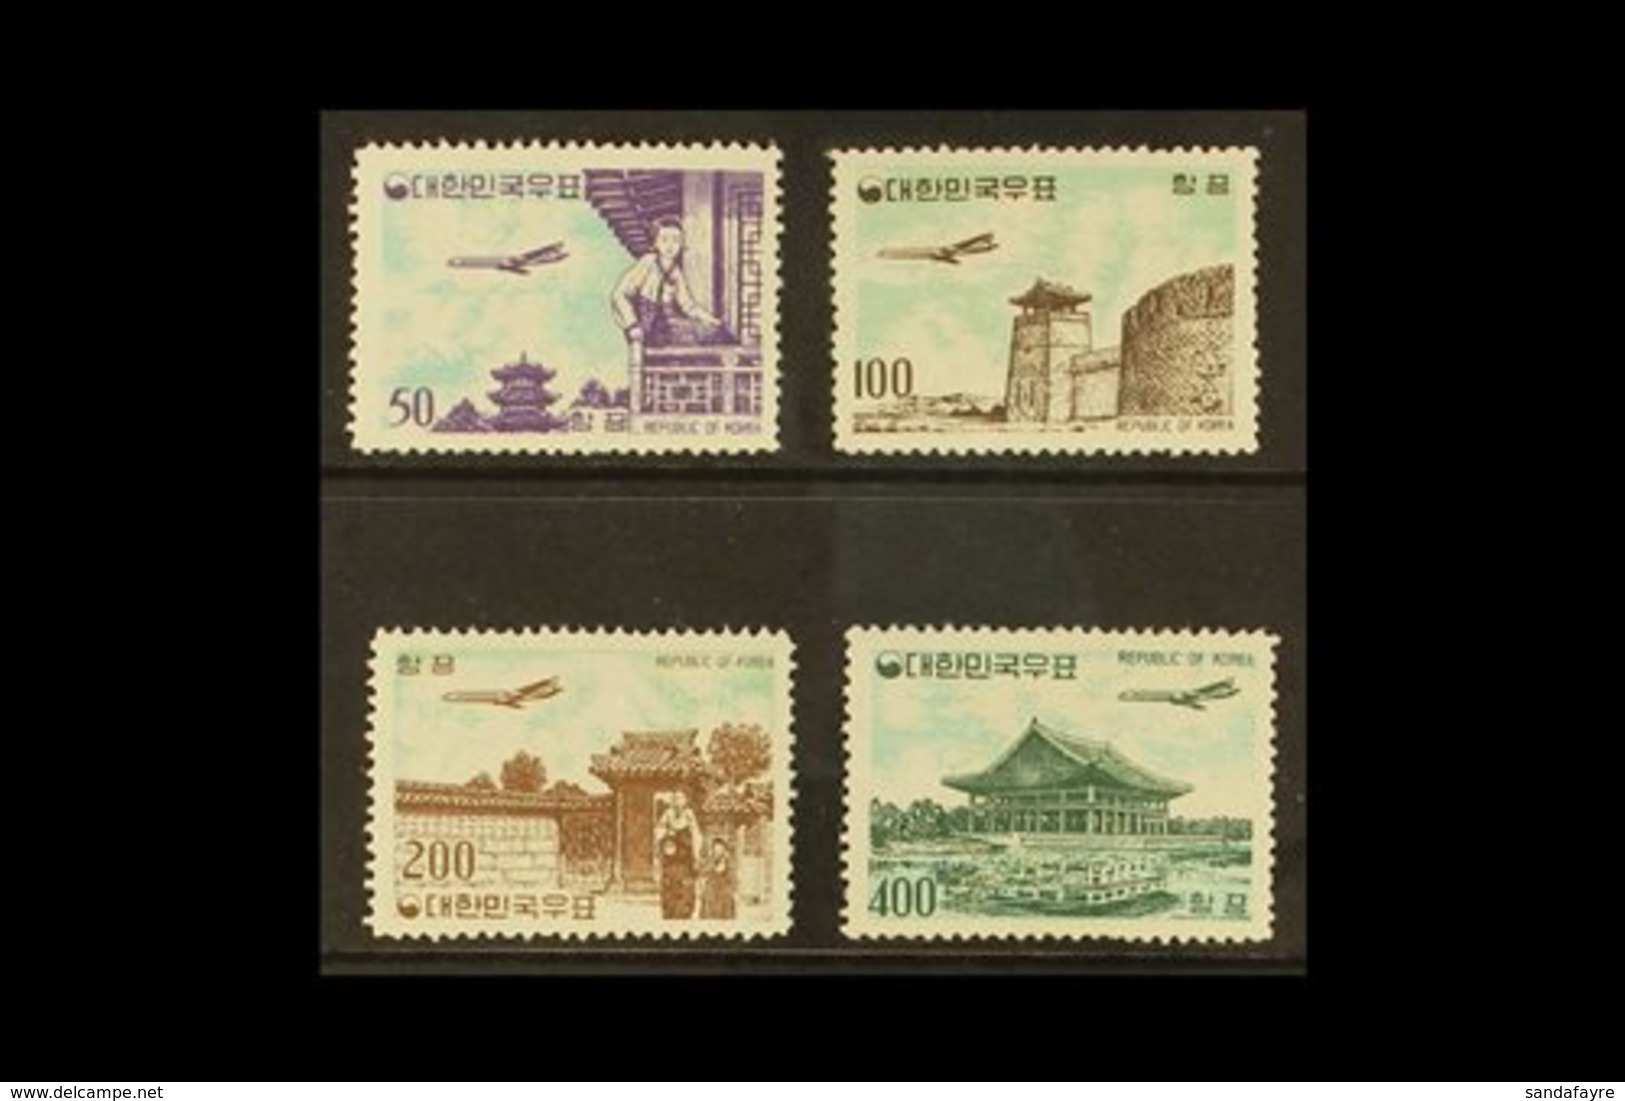 1961 Airmail Set, SG 417/20, Natural Line In Gum On 400h, Otherwise Never Hinged Mint (4 Stamps). For More Images, Pleas - Corea Del Sur